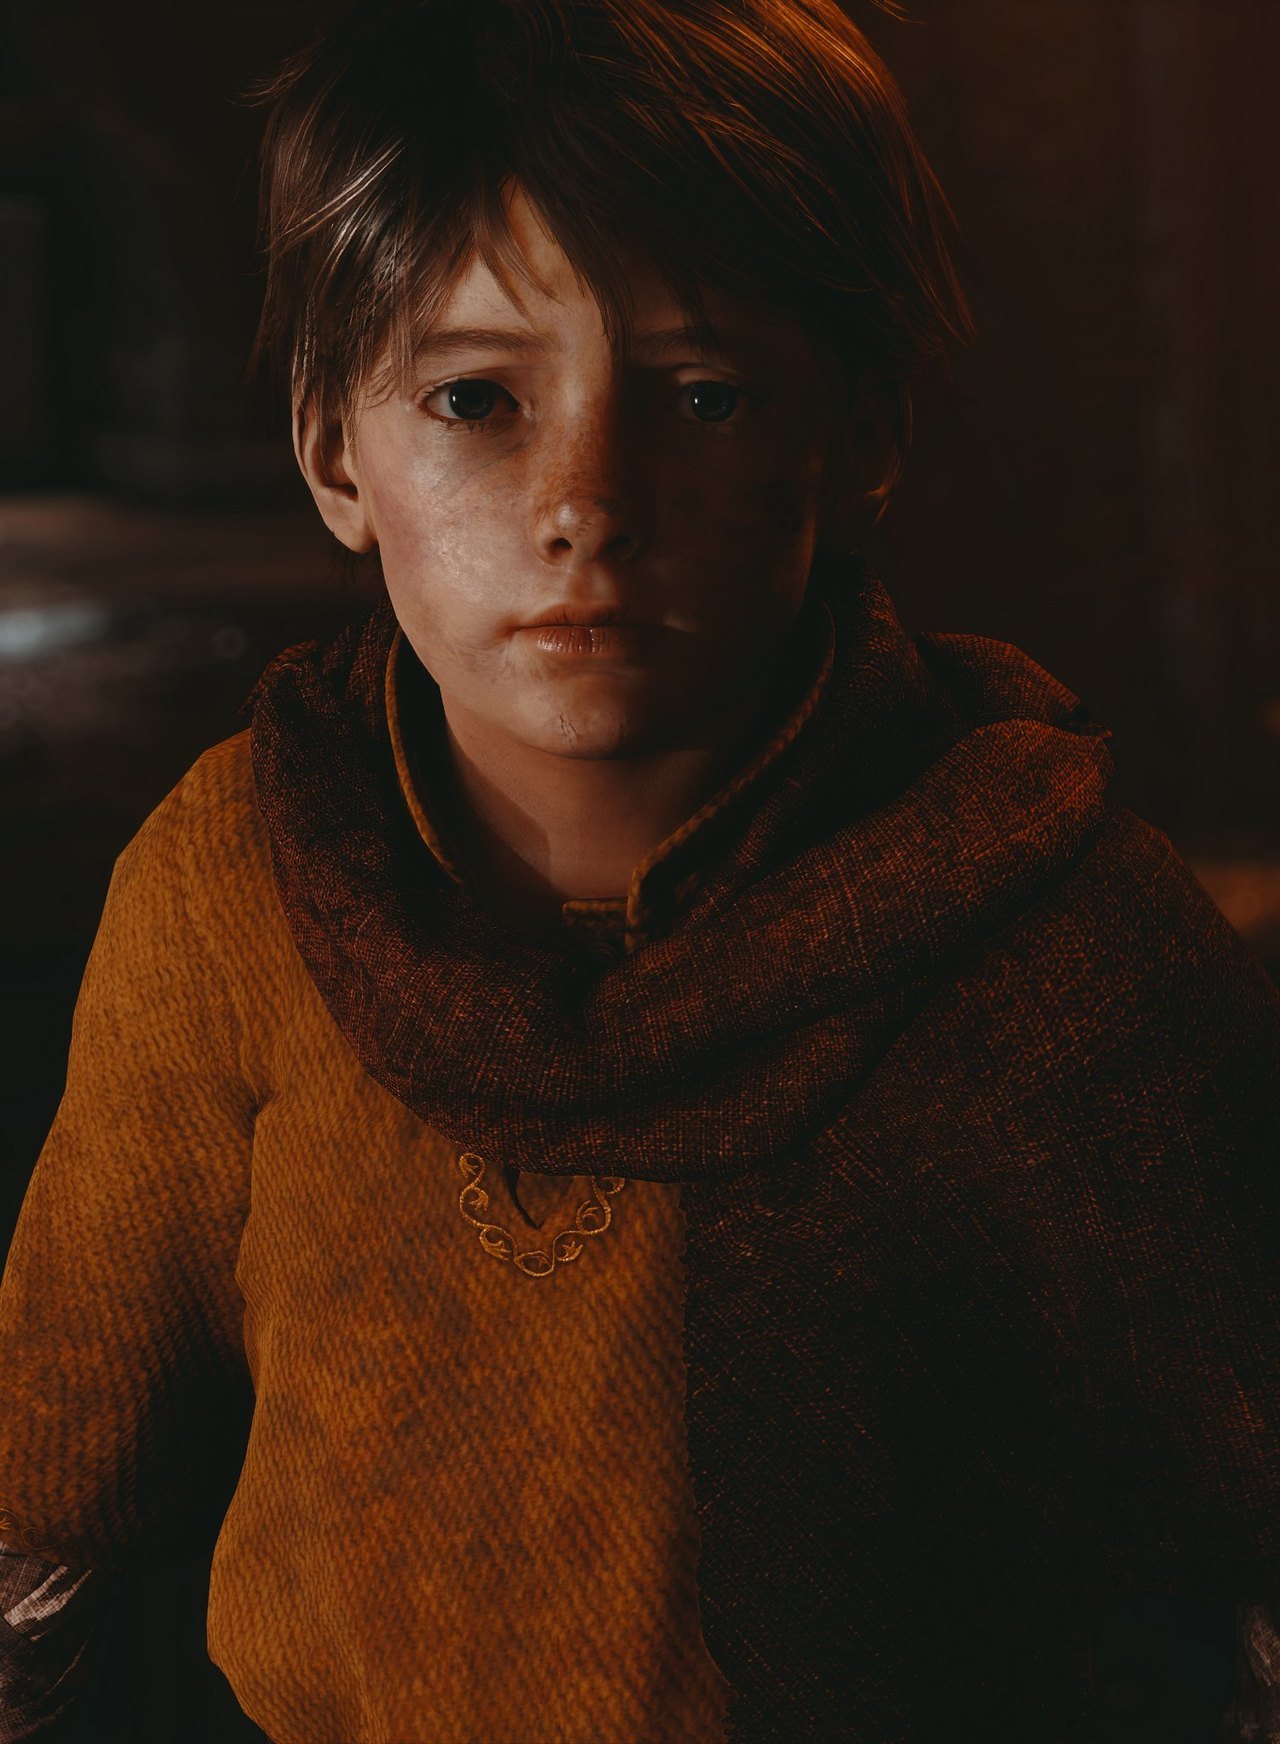 A Plague Tale: Innocence – Behind the Scene Ep. 3 (with subtitles)   Children of the Plague. Watch or re-watch our behind the scene series. A Plague  Tale - Innocence, available May